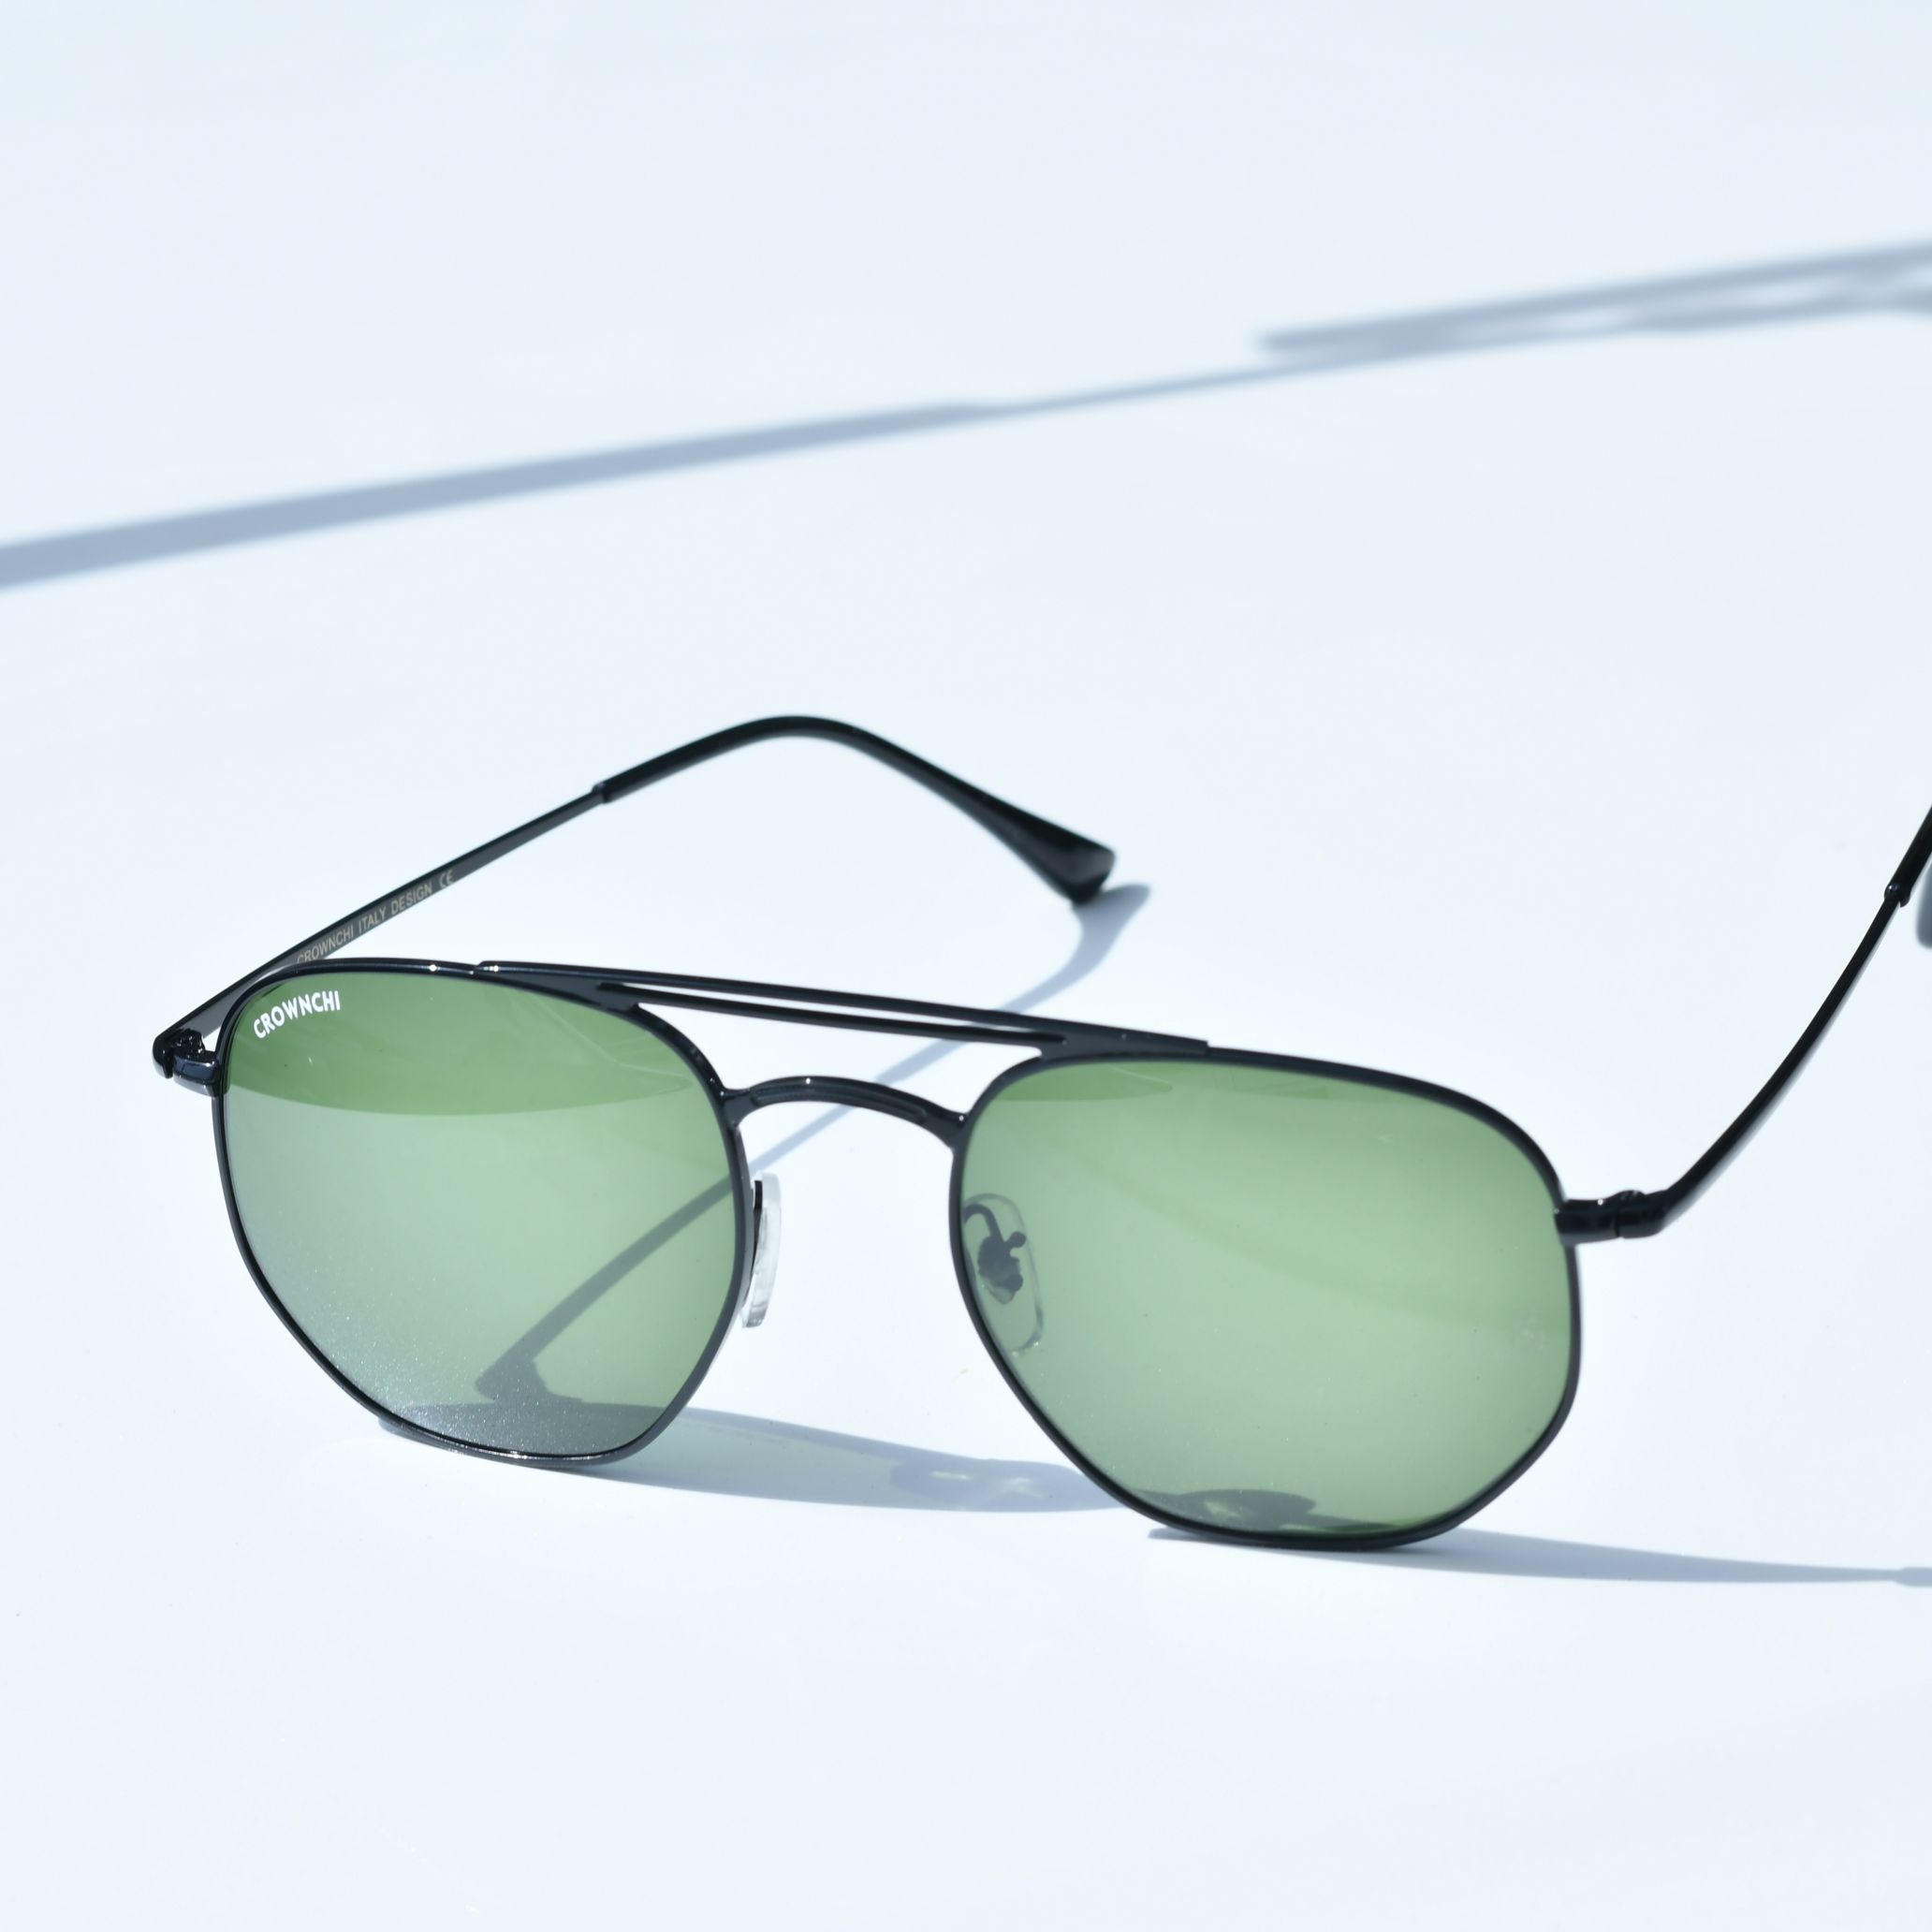 Moscow Black Green Round Edition Sunglasses